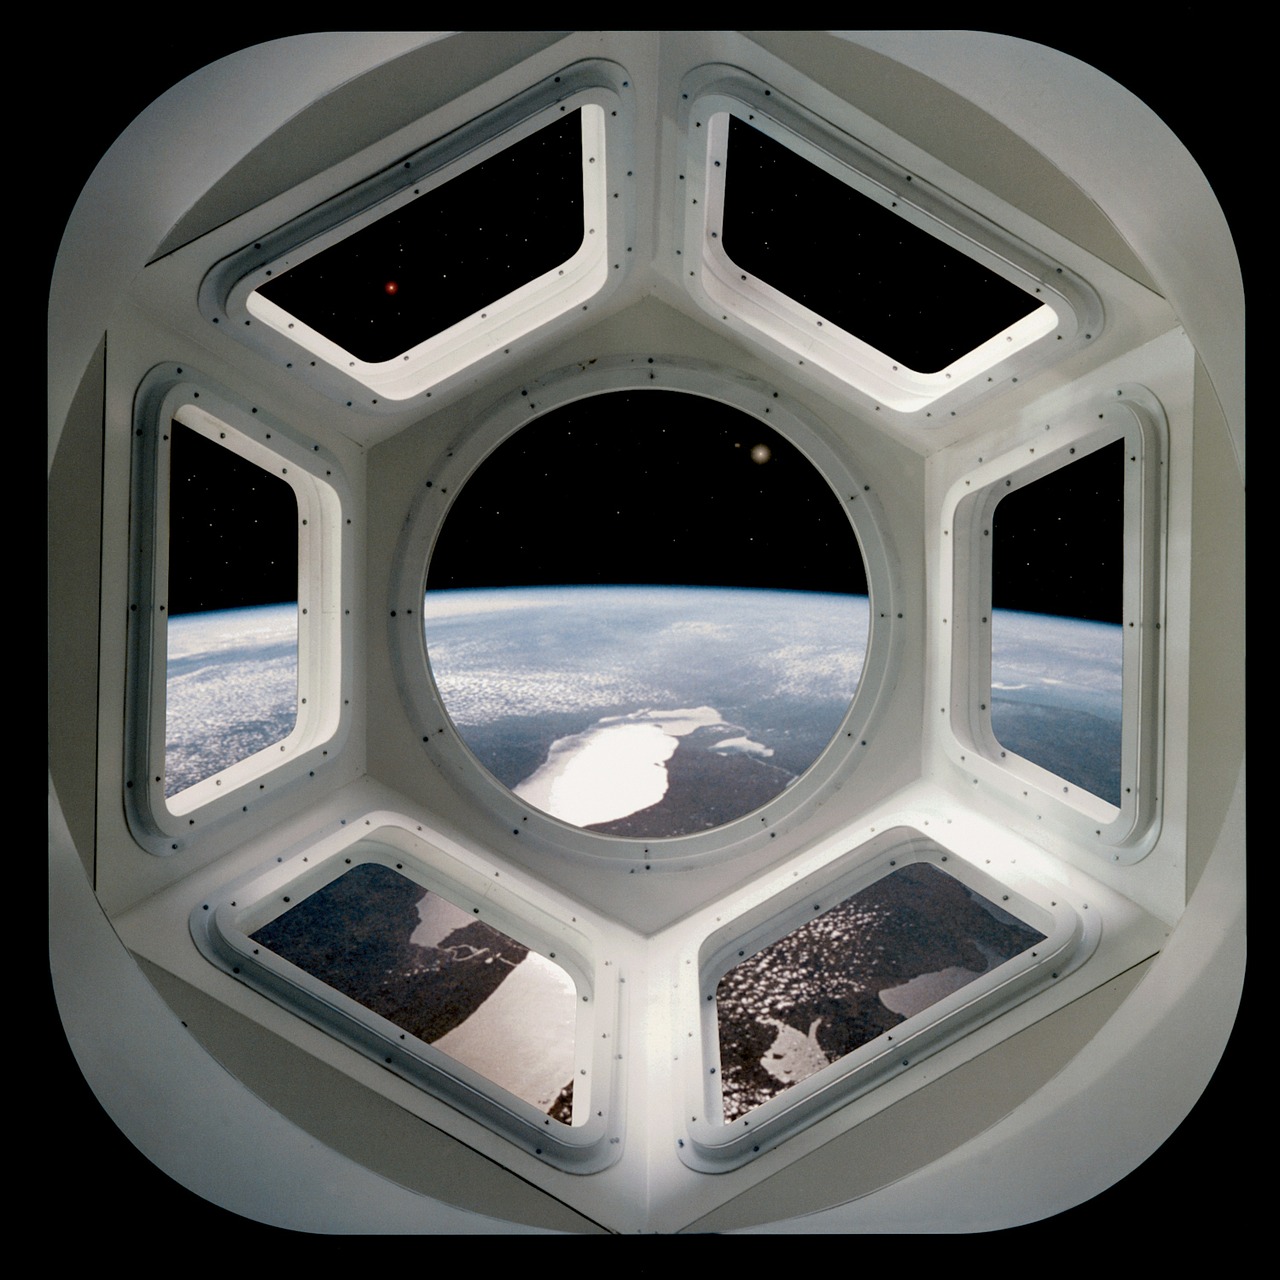 international space station space station cupola free photo